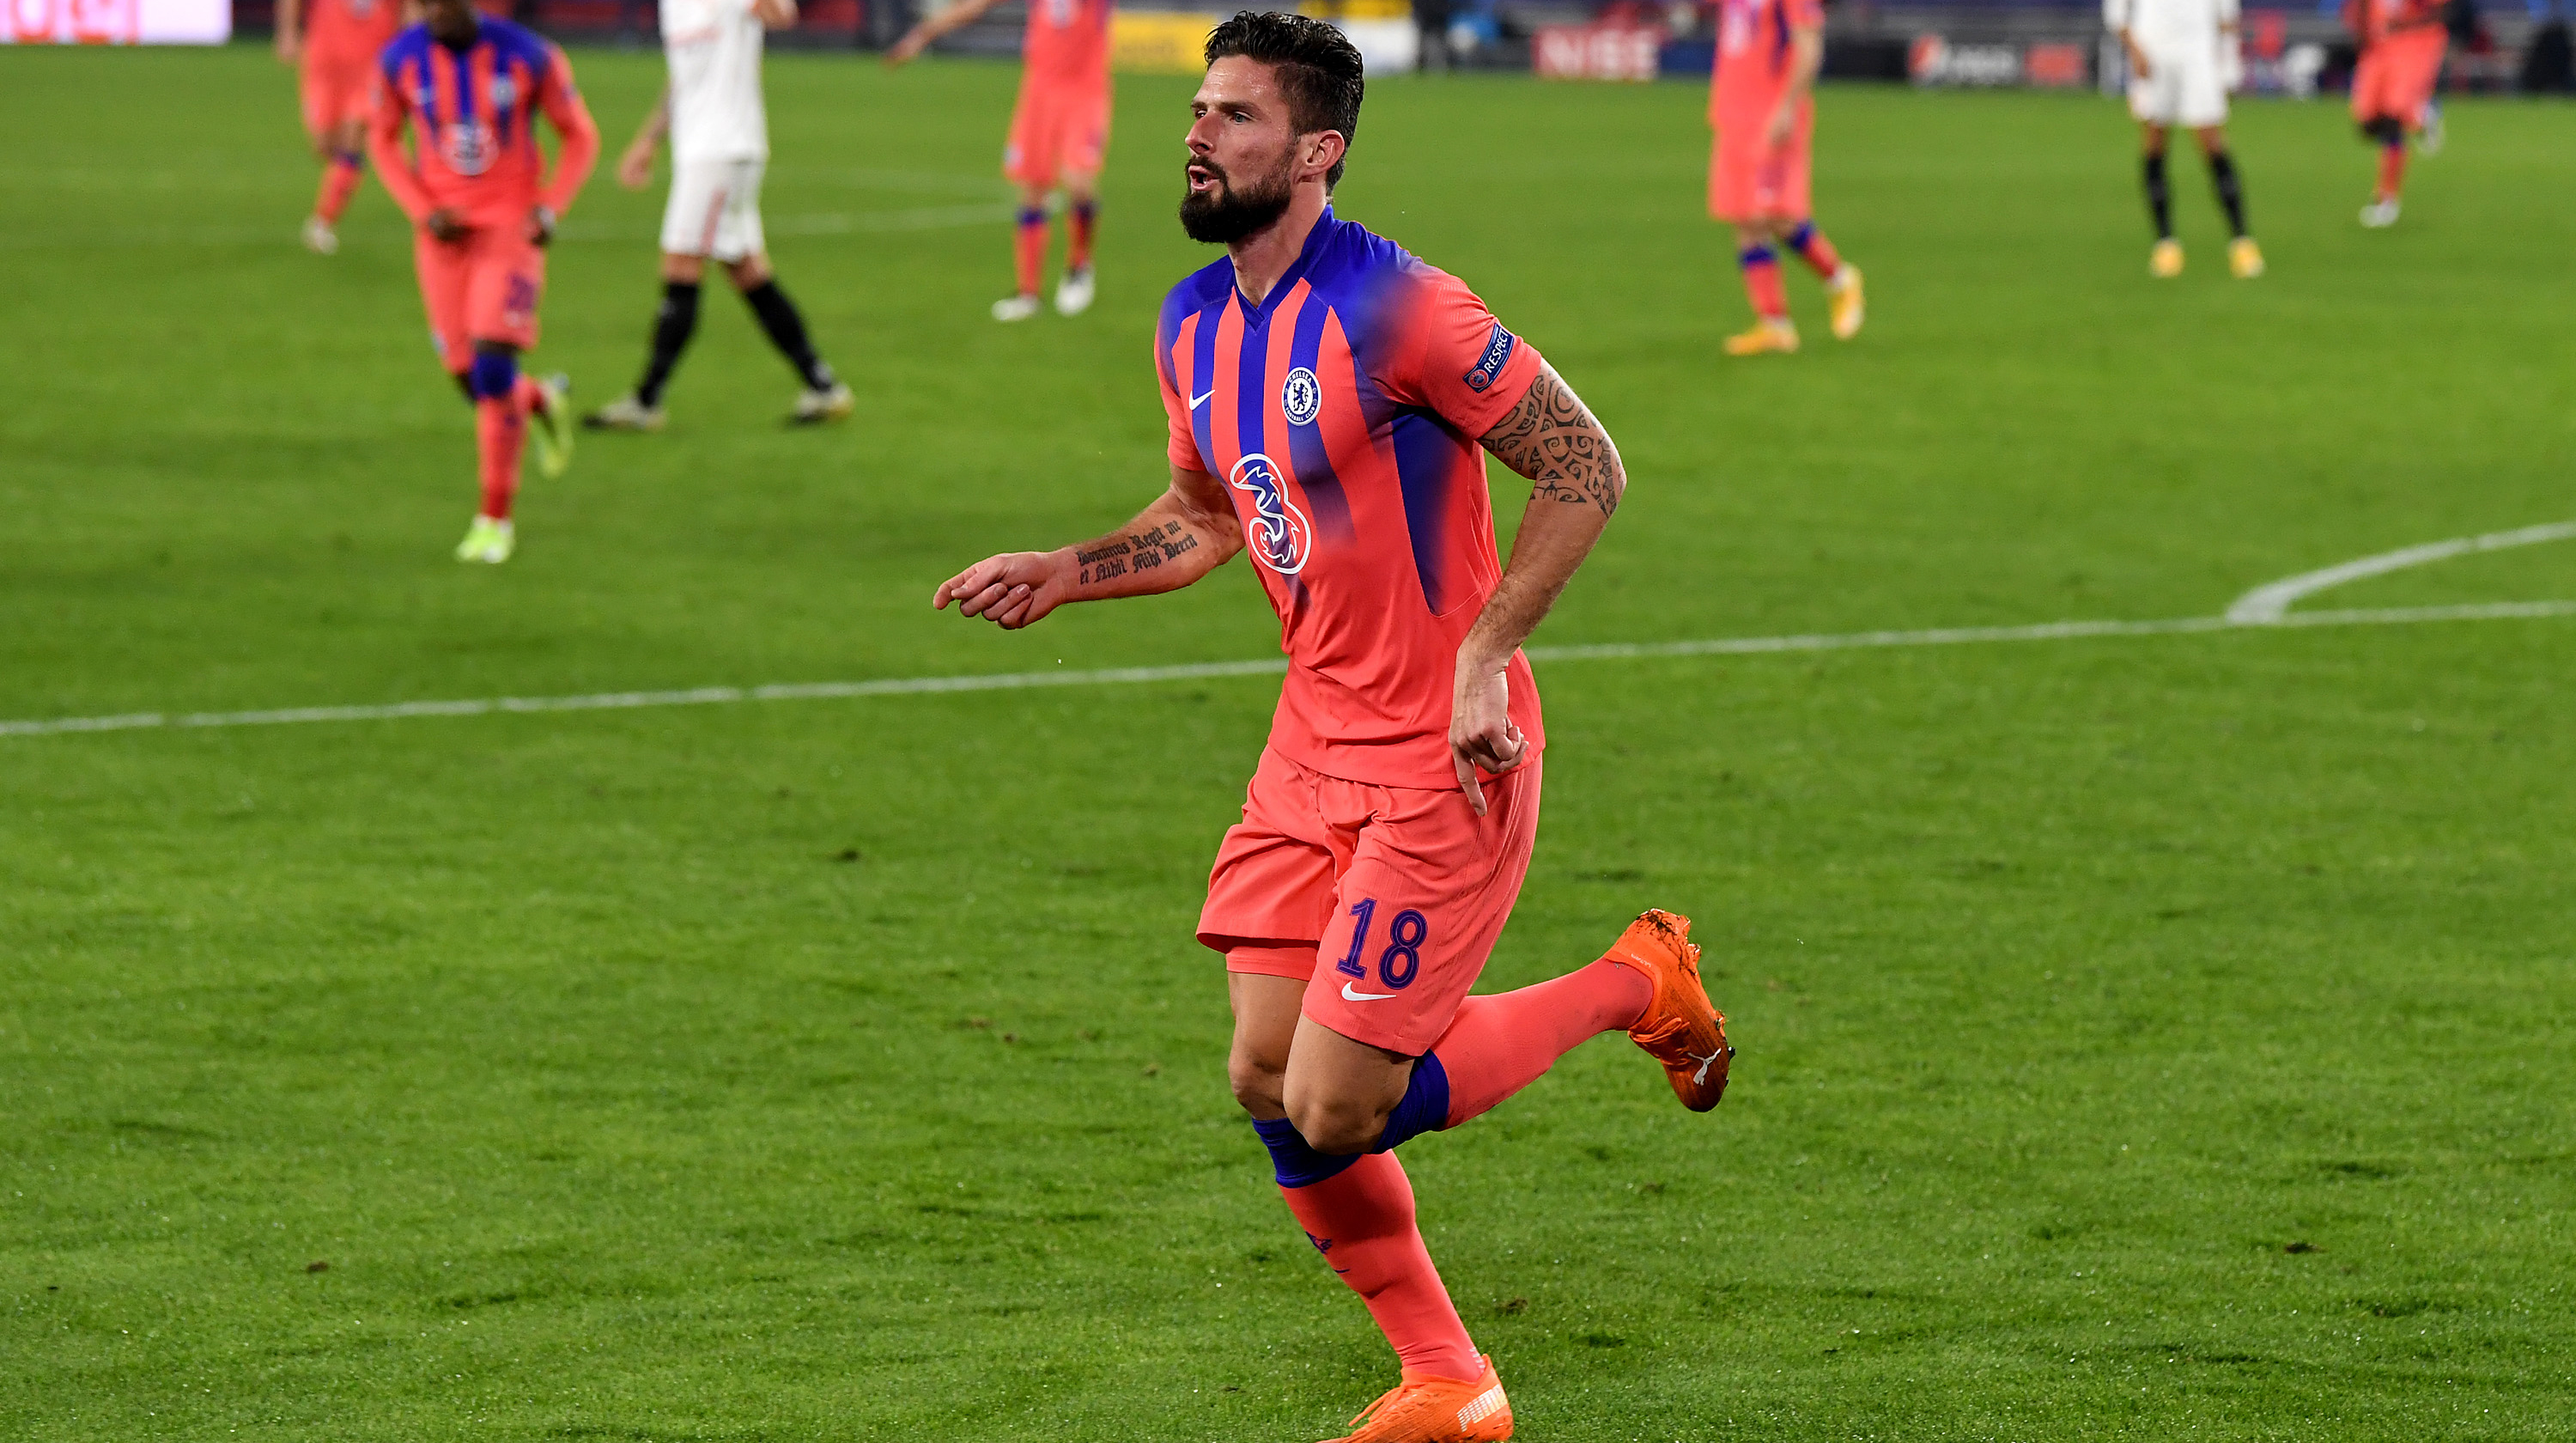 Olivier Giroud of Chelsea celebrates after scoring their sides second goal during the UEFA Champions League Group E stage match between FC Sevilla and Chelsea FC at Estadio Ramon Sanchez Pizjuan on December 02, 2020 in Seville, Spain.